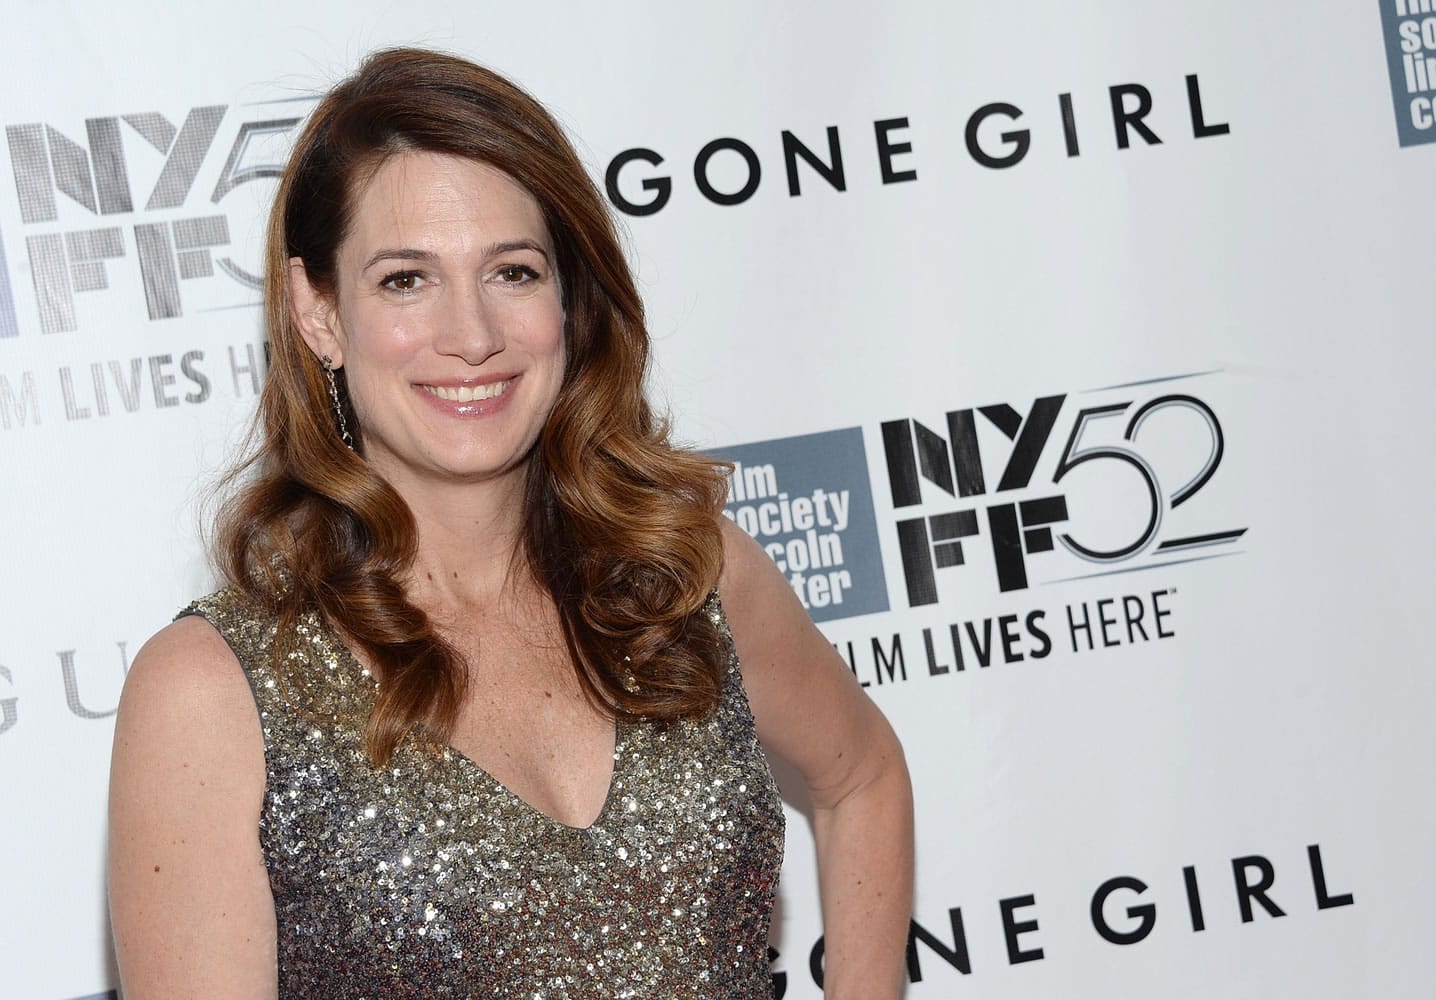 Gillian Flynn
Author of &quot;Gone Girl,&quot; which has been made into a film starring Ben Affleck